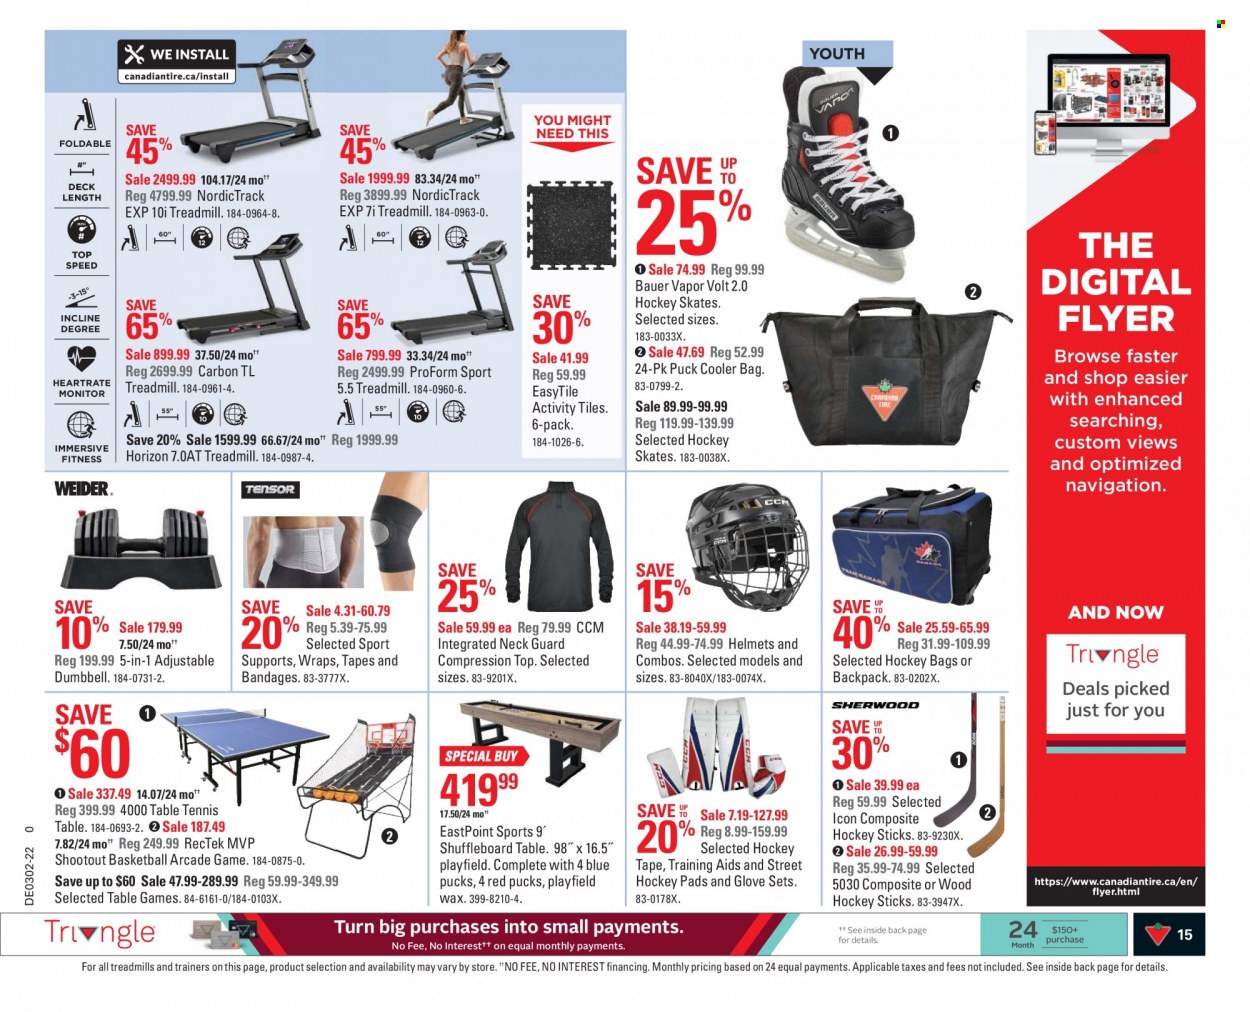 thumbnail - Canadian Tire Flyer - January 07, 2022 - January 13, 2022 - Sales products - bag, gloves, cooler bag, table, trainers, basketball, treadmill, ProForm, dumbbell, table tennis table, hockey skates, skates, backpack. Page 15.